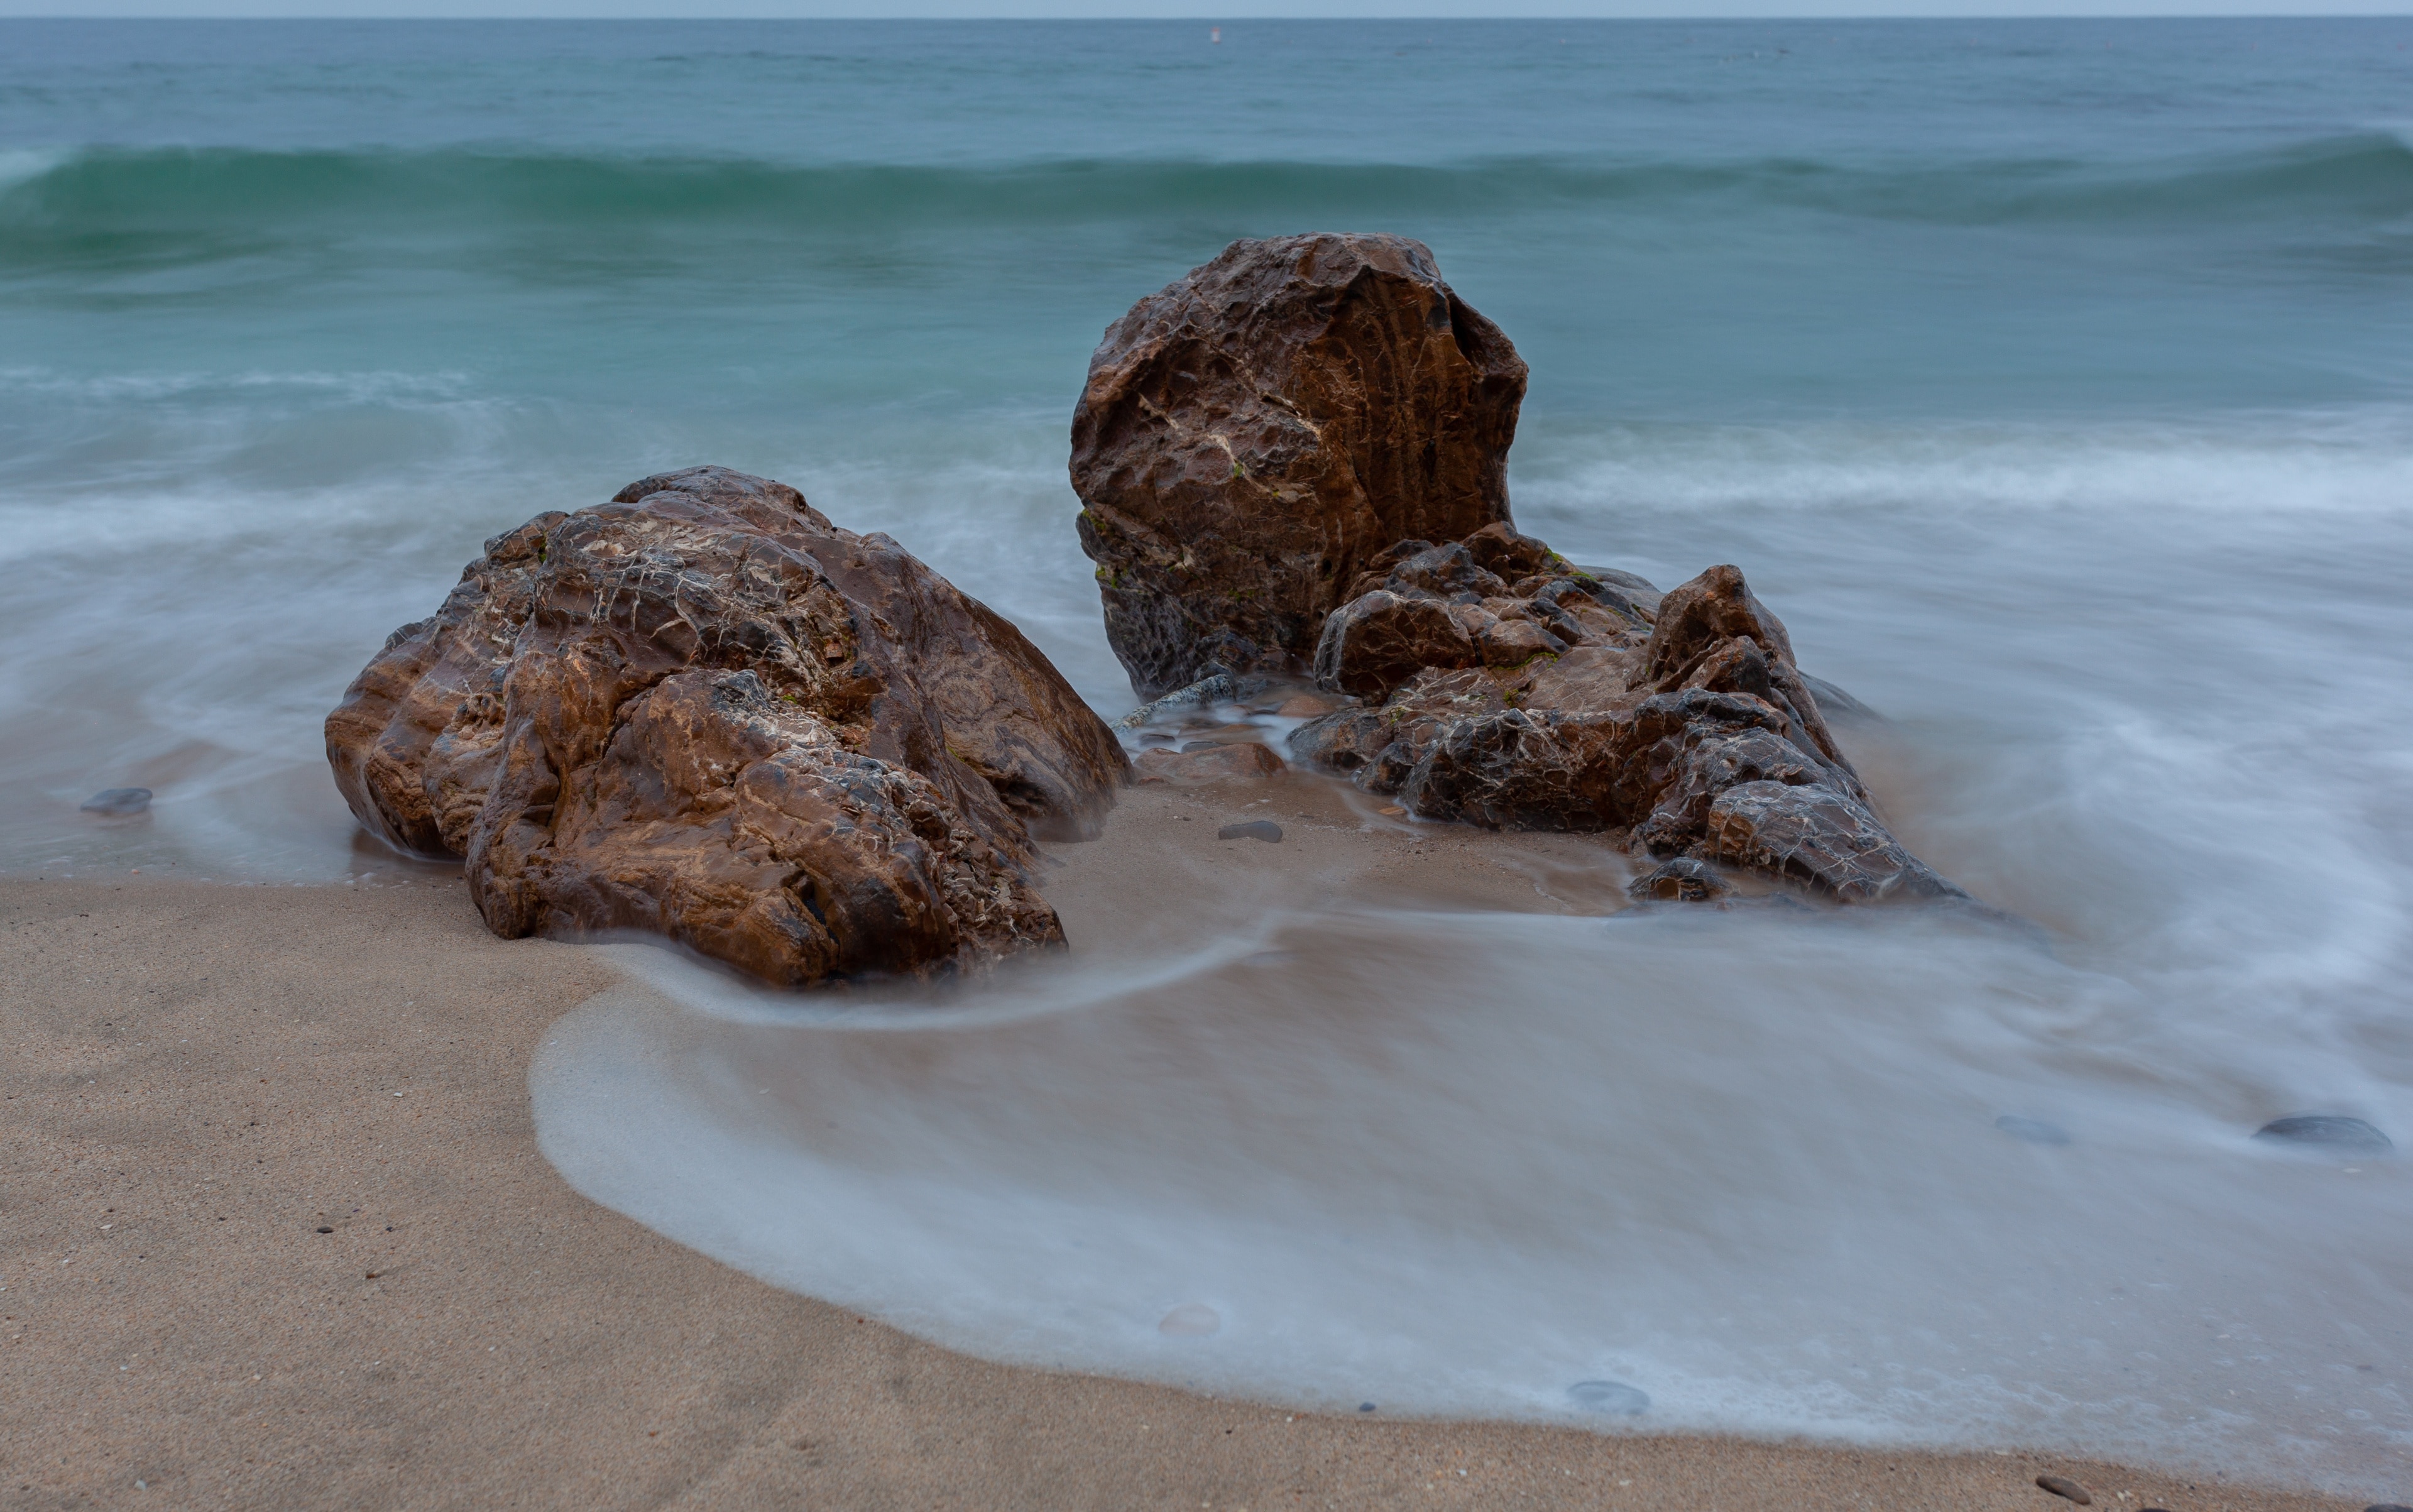 One of the places I go to most for photography. Lots of different rock formations at this beach. 